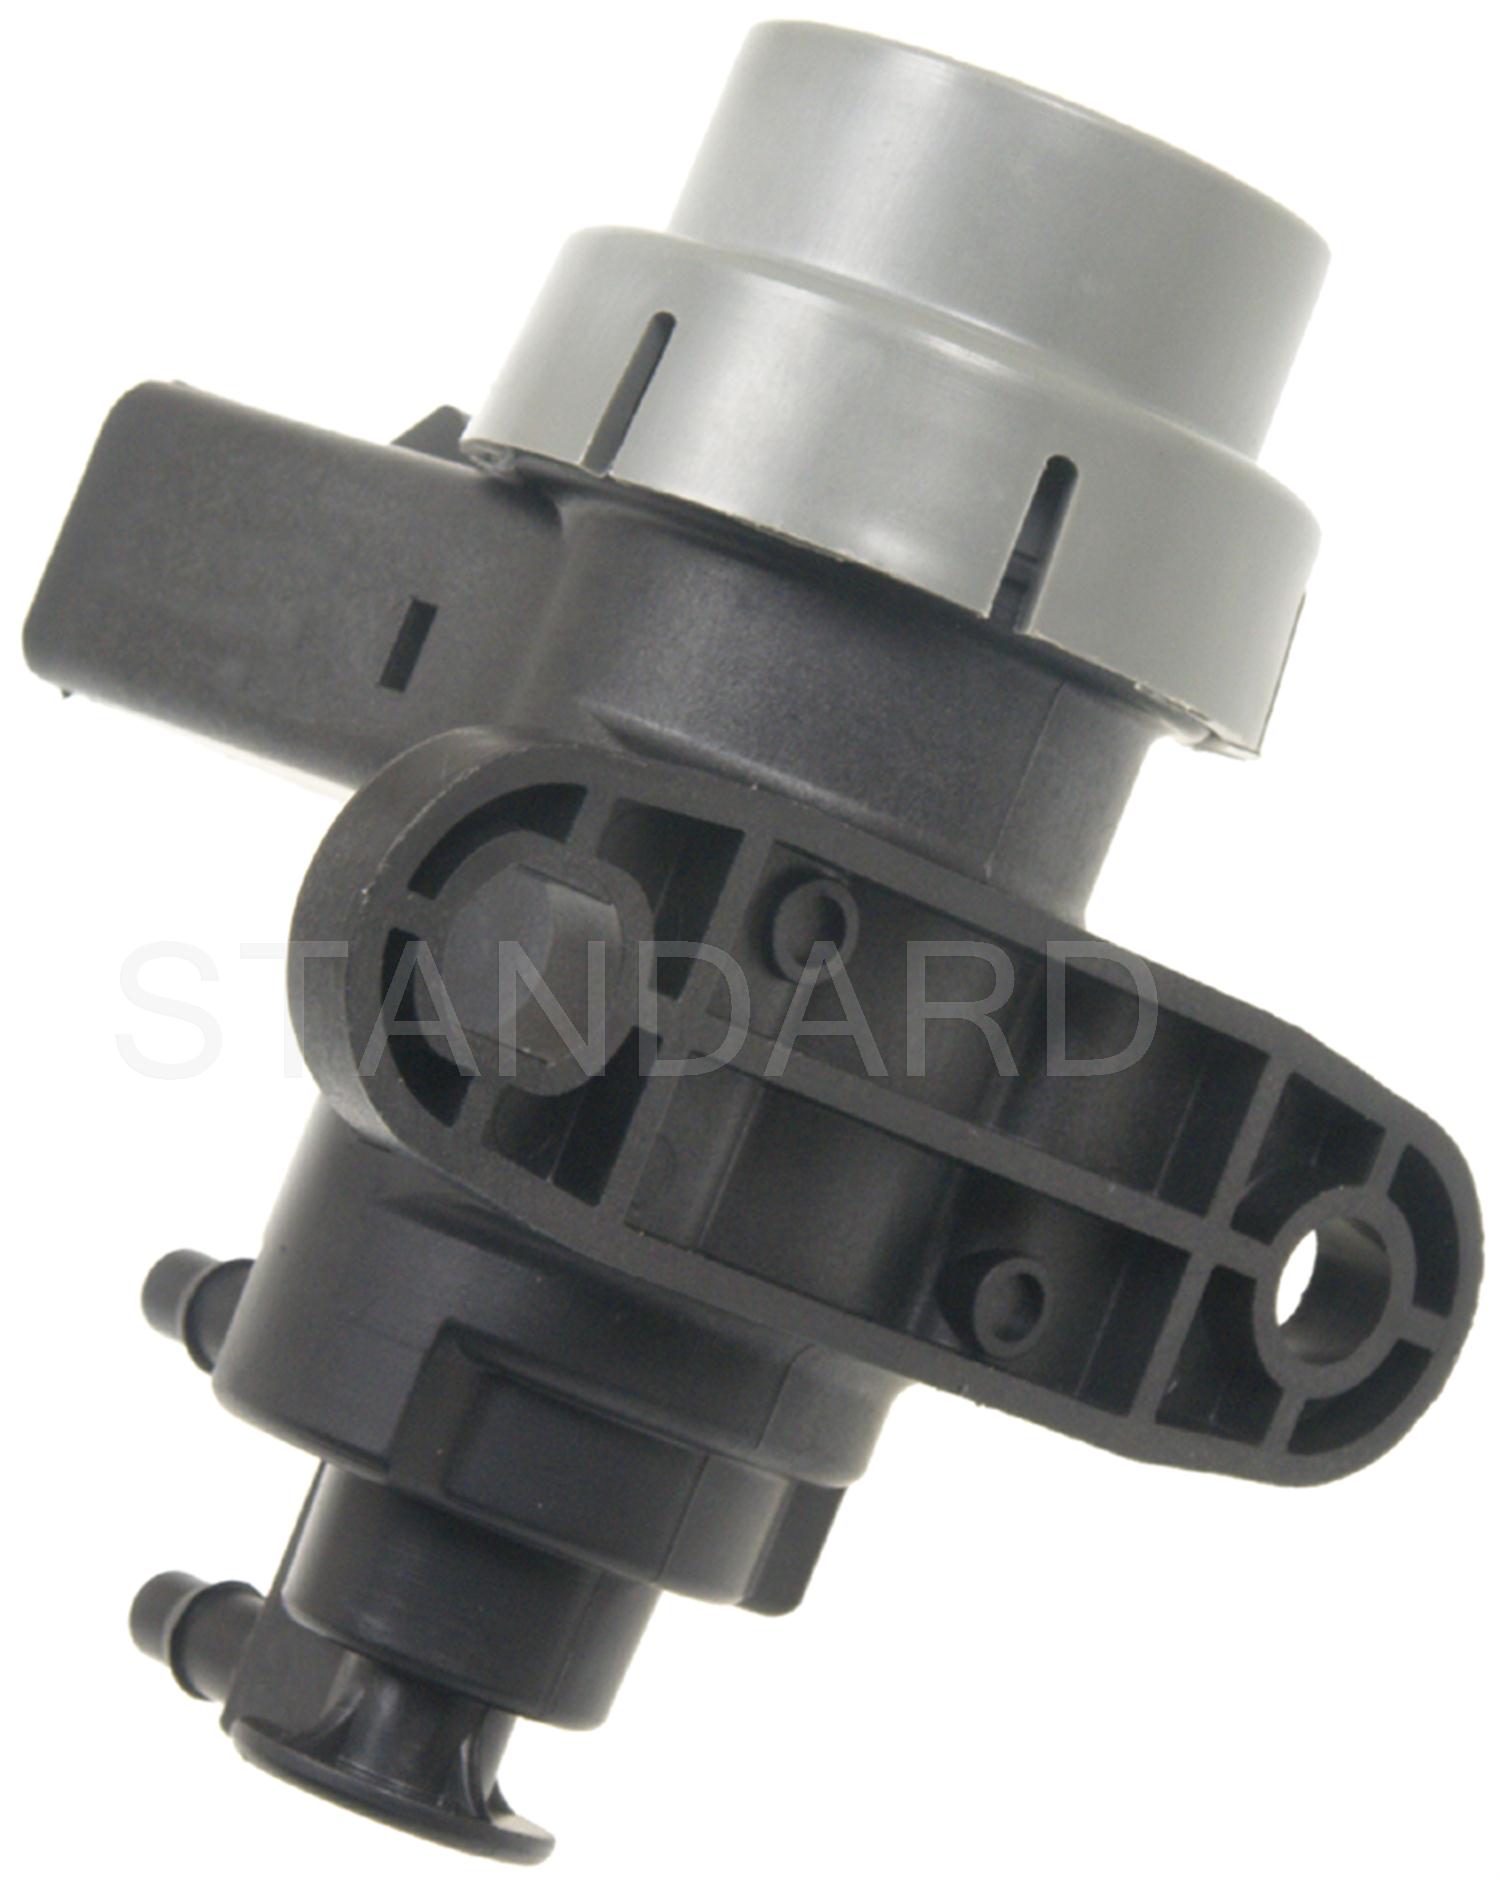 Picture of Standard Motor Products VS77 EGR Vacuum Solenoid